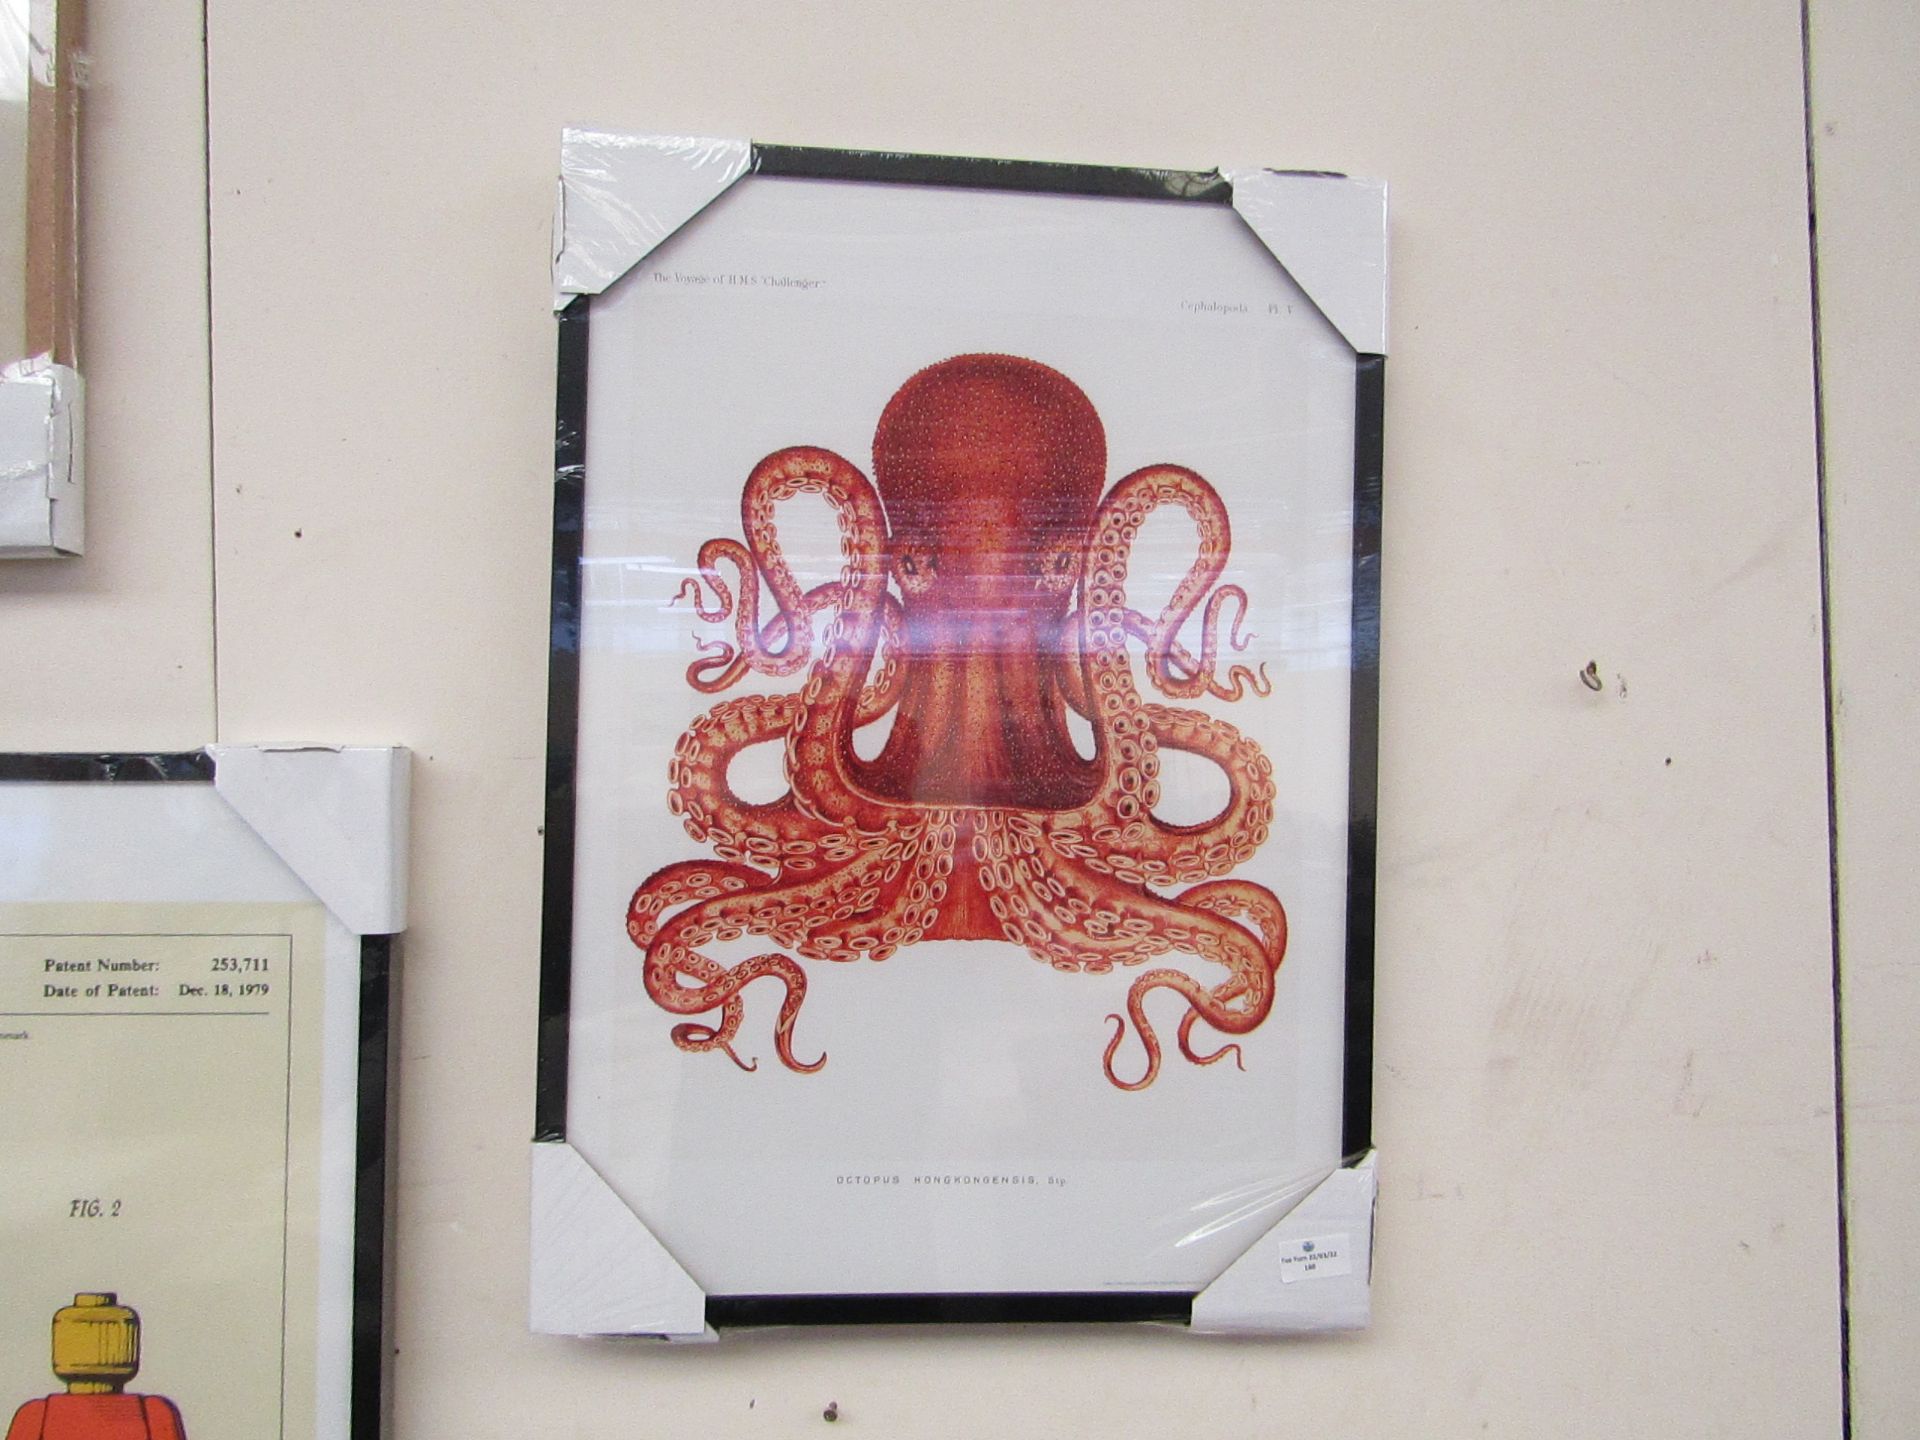 1 x Made.com Vintage Octopus Illustration from the Natural History Museum Framed Wall Art Print A2